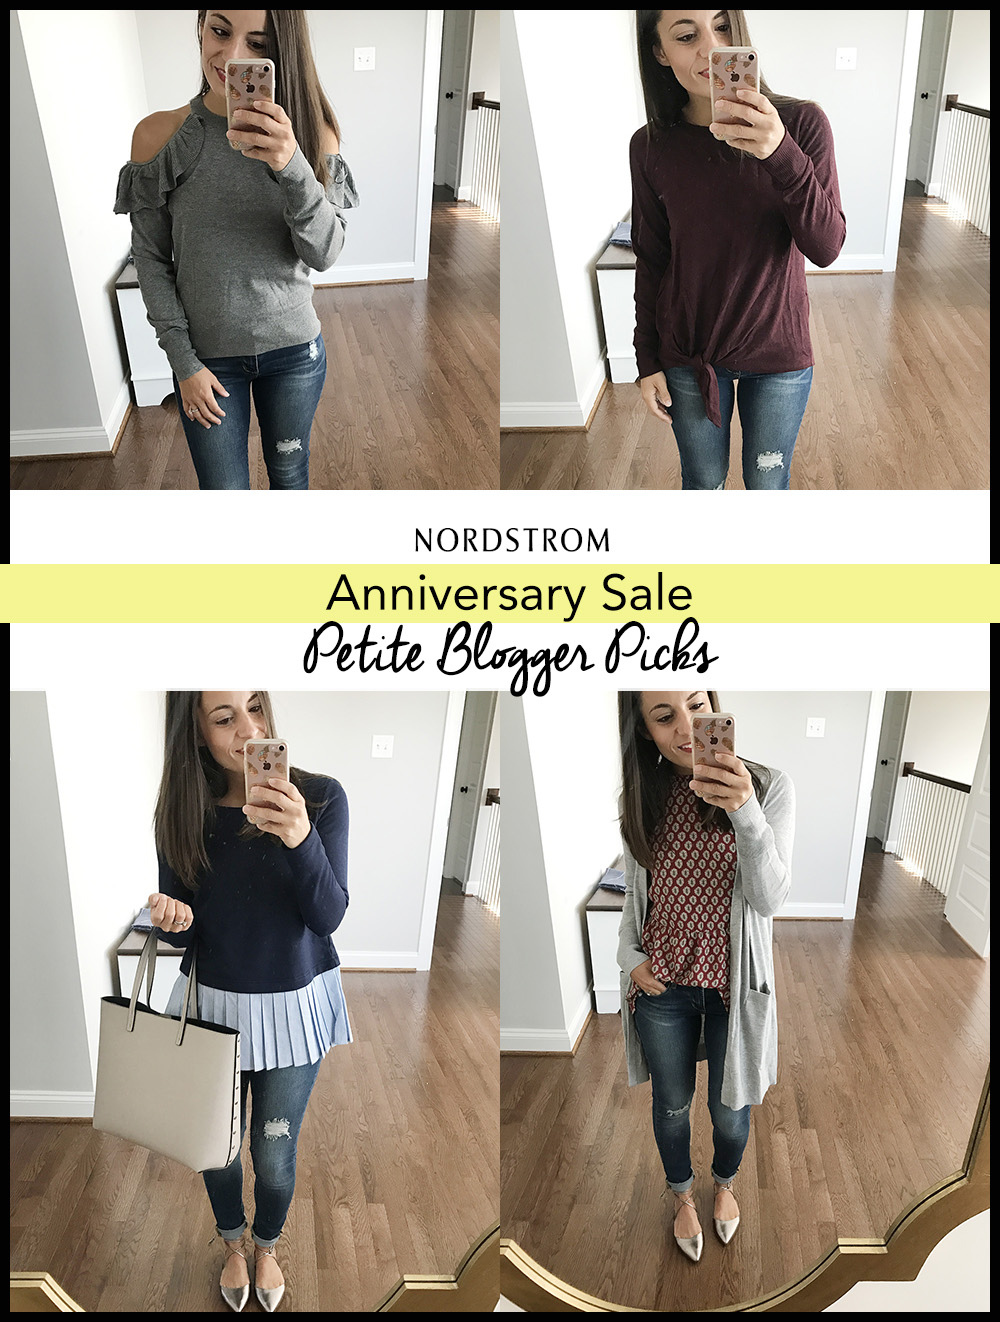 Nordstrom Anniversary Sale Petite Blogger Picks & Oh, Hey Girl! Link-Up -  Pumps & Push Ups